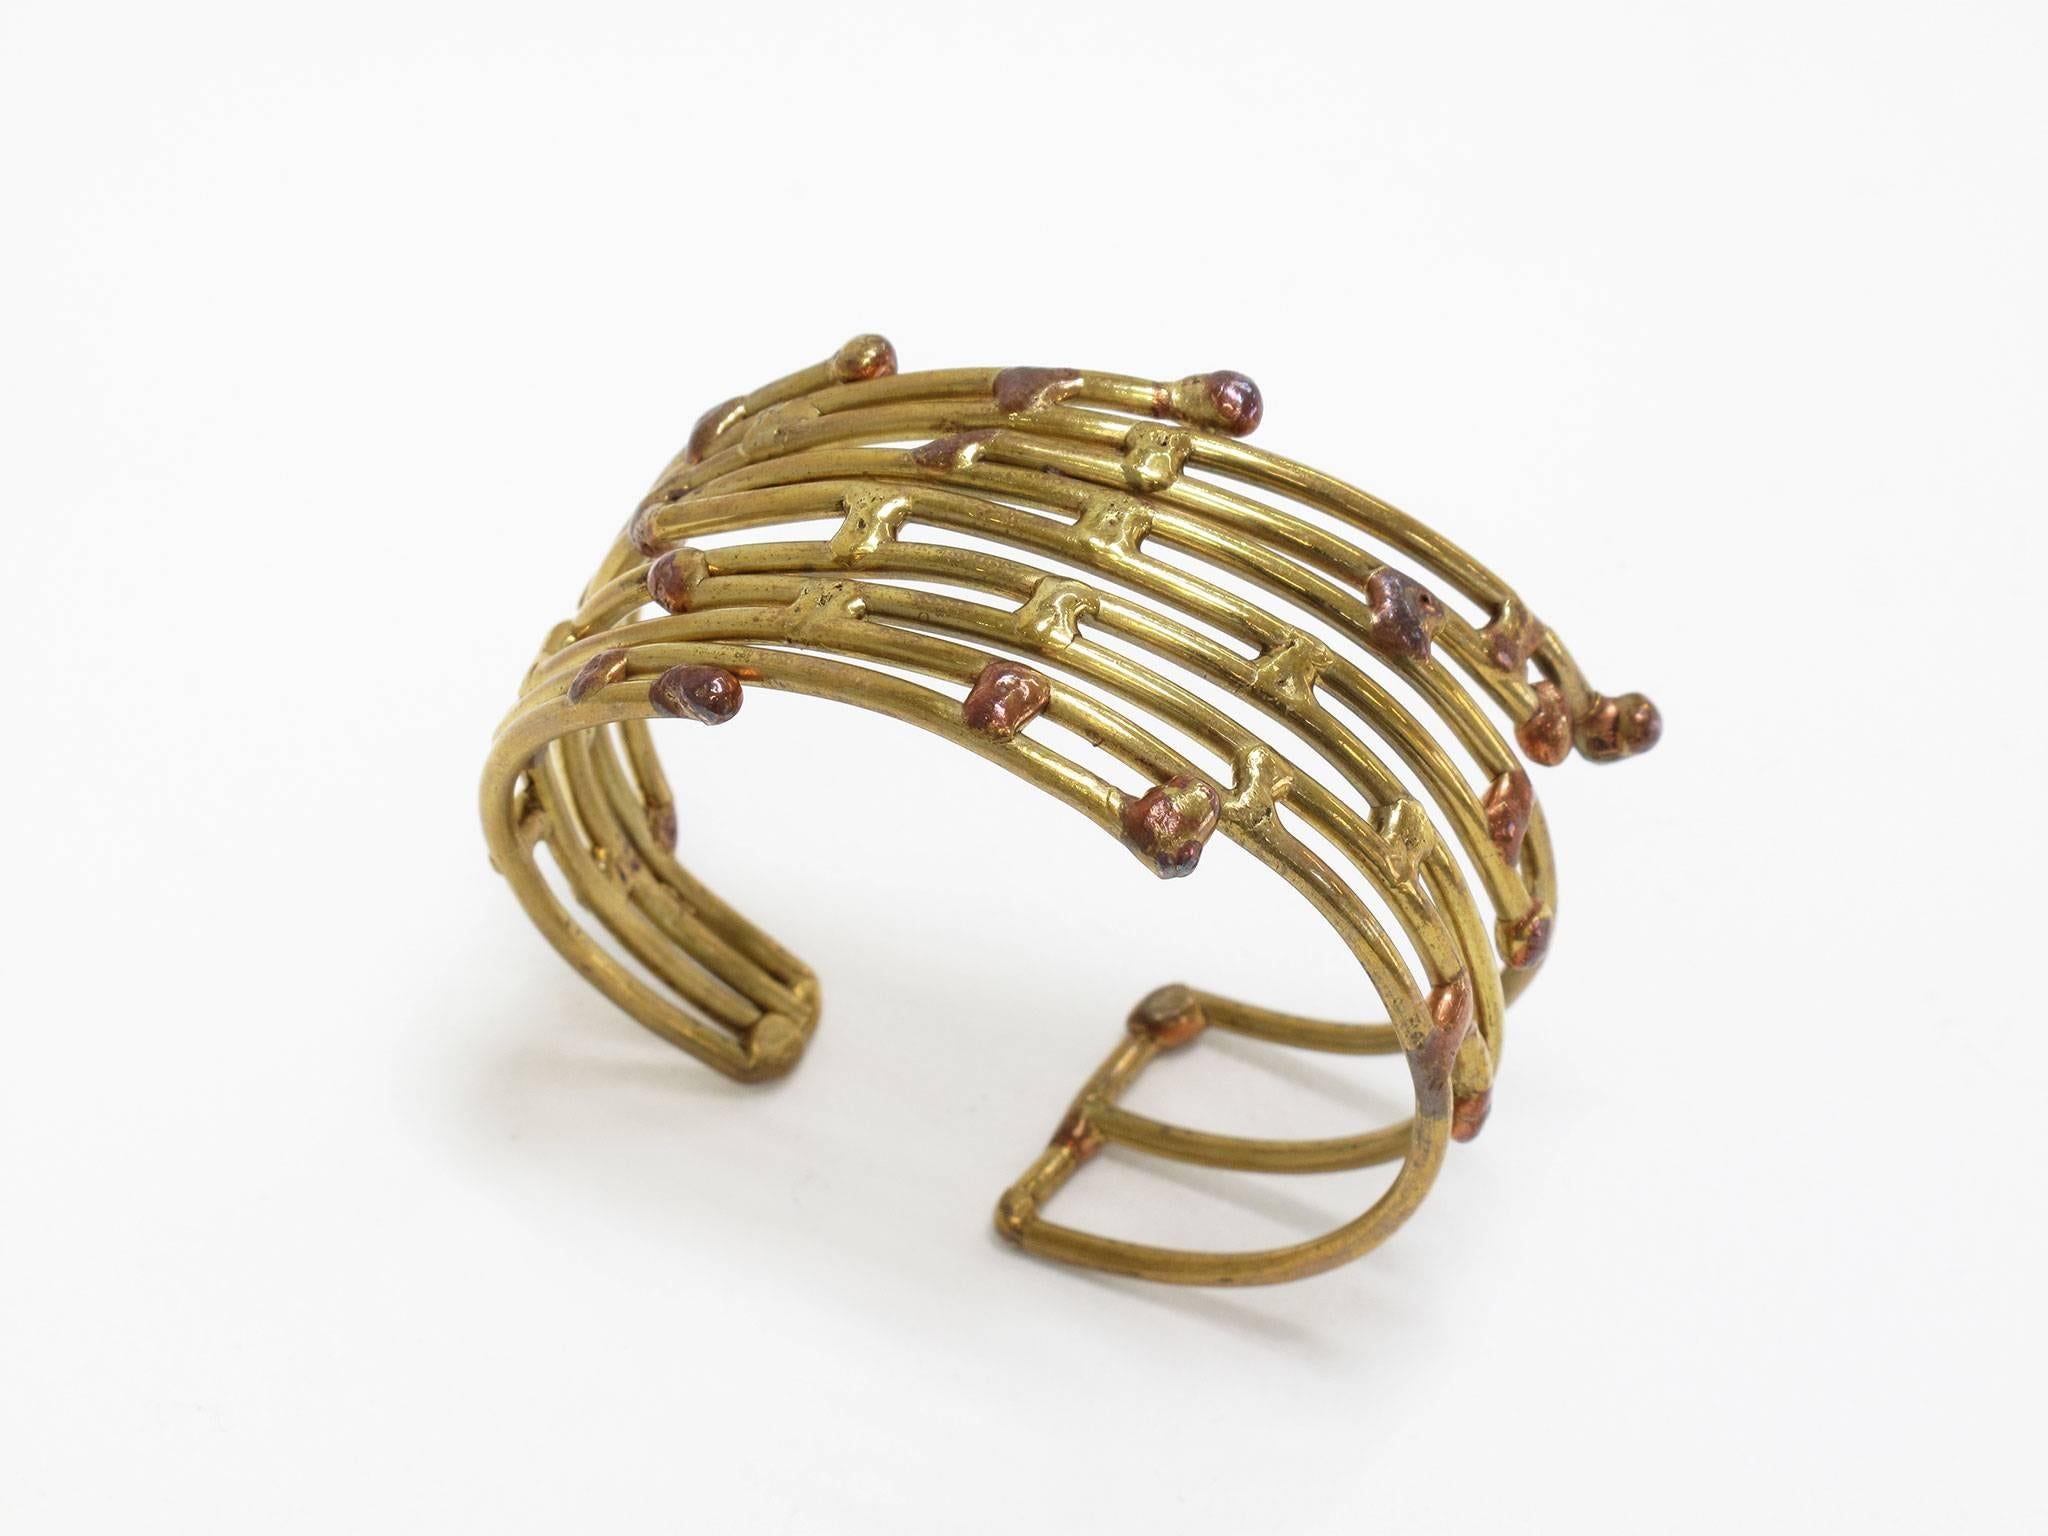 American Handmade Vintage Copper and Brass Cuff Bracelet For Sale